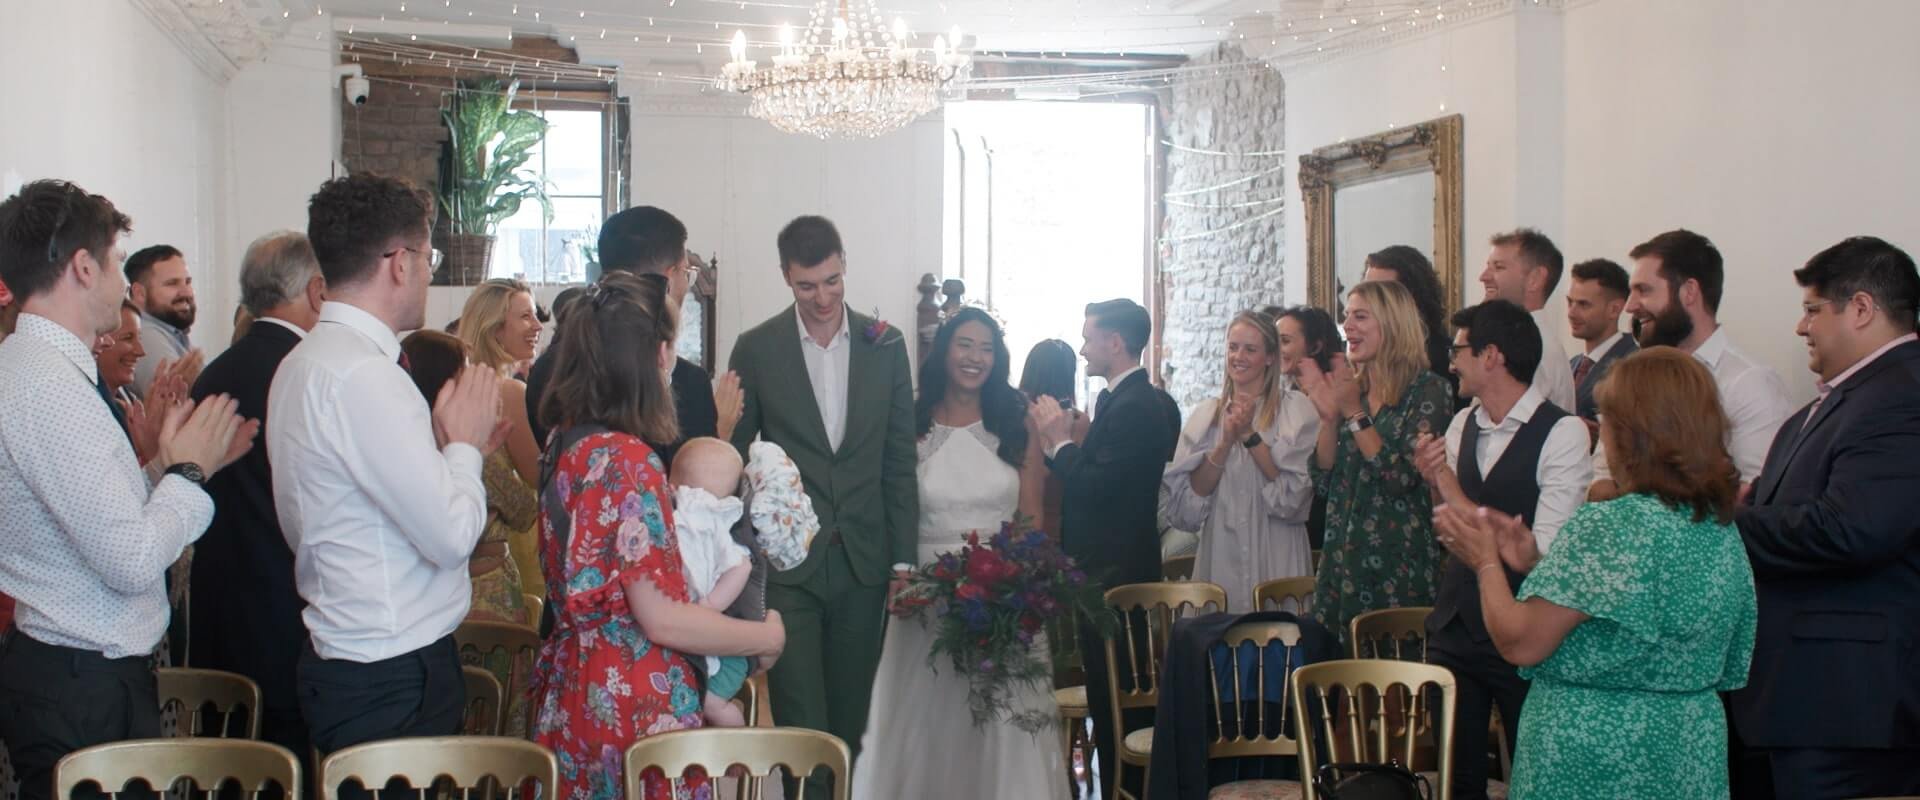 The wedding guests erupt in cheers as Rita and Michael enter the wedding ceremony together